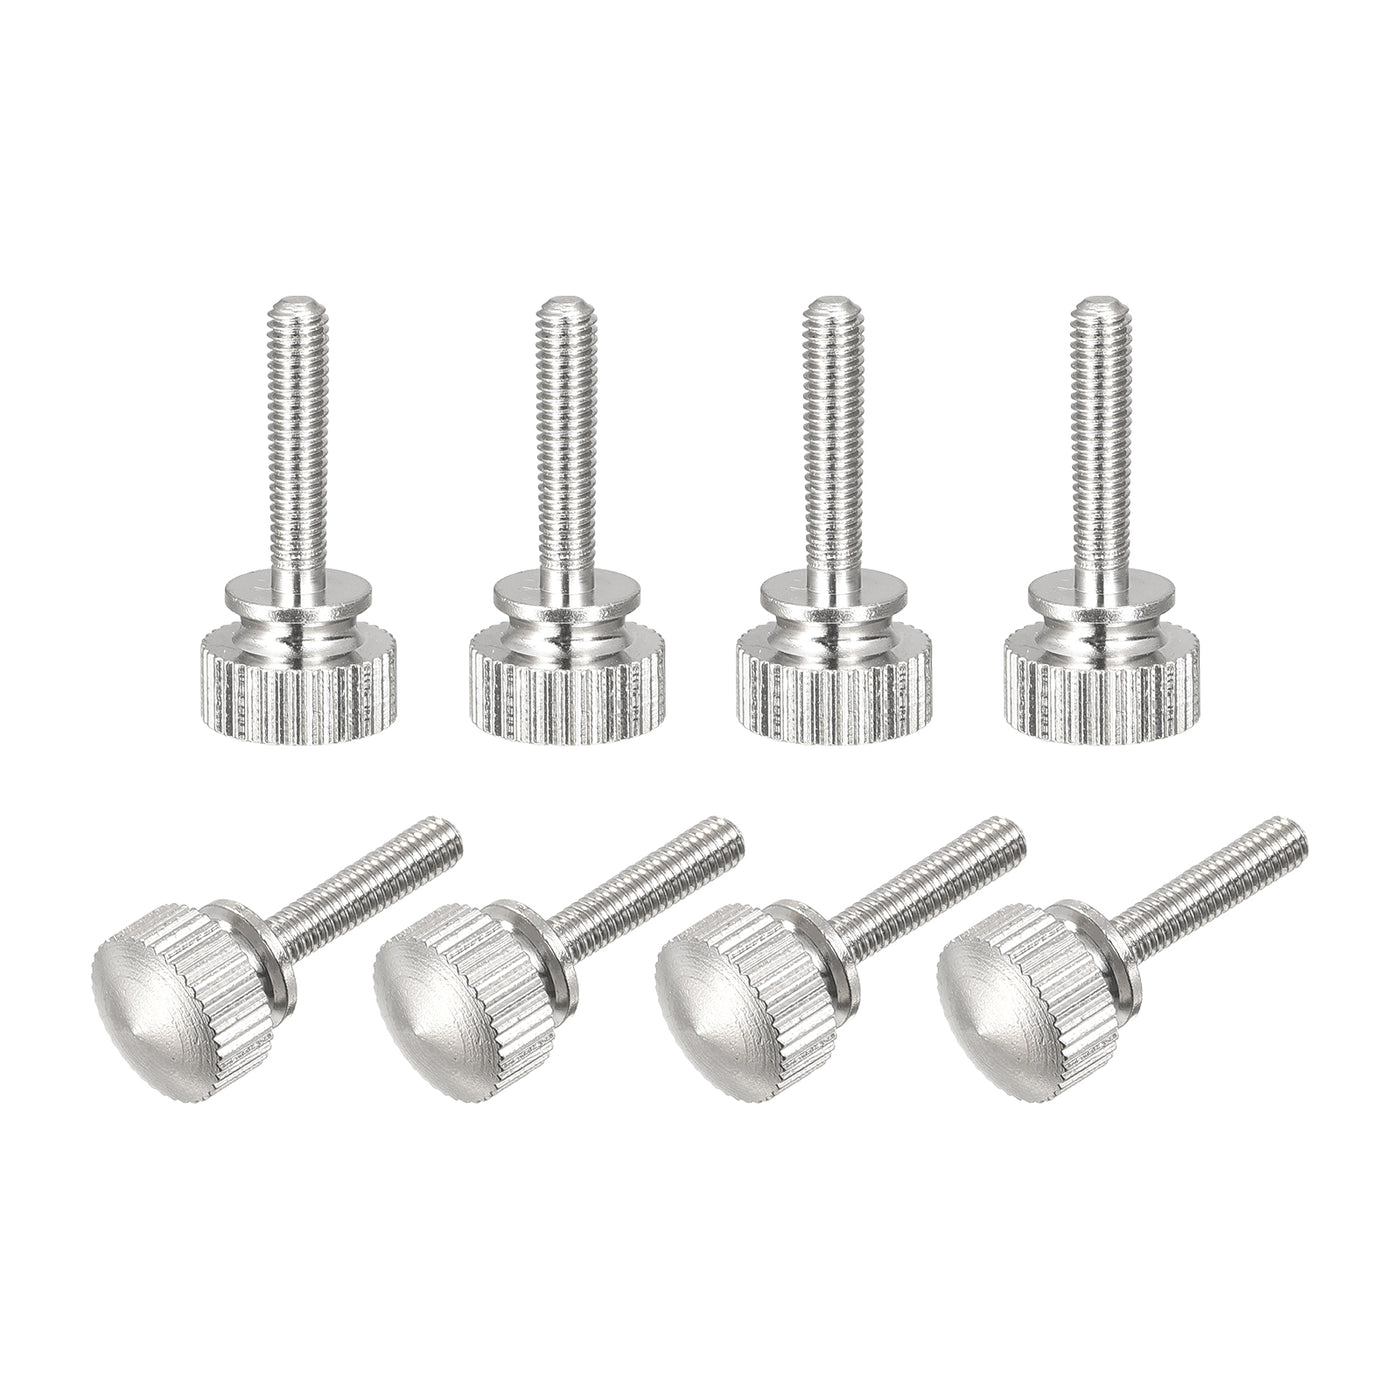 uxcell Uxcell Knurled Thumb Screws, M3x14mm Brass Shoulder Bolts Grip Knobs Fasteners, Nickel Plated 8Pcs